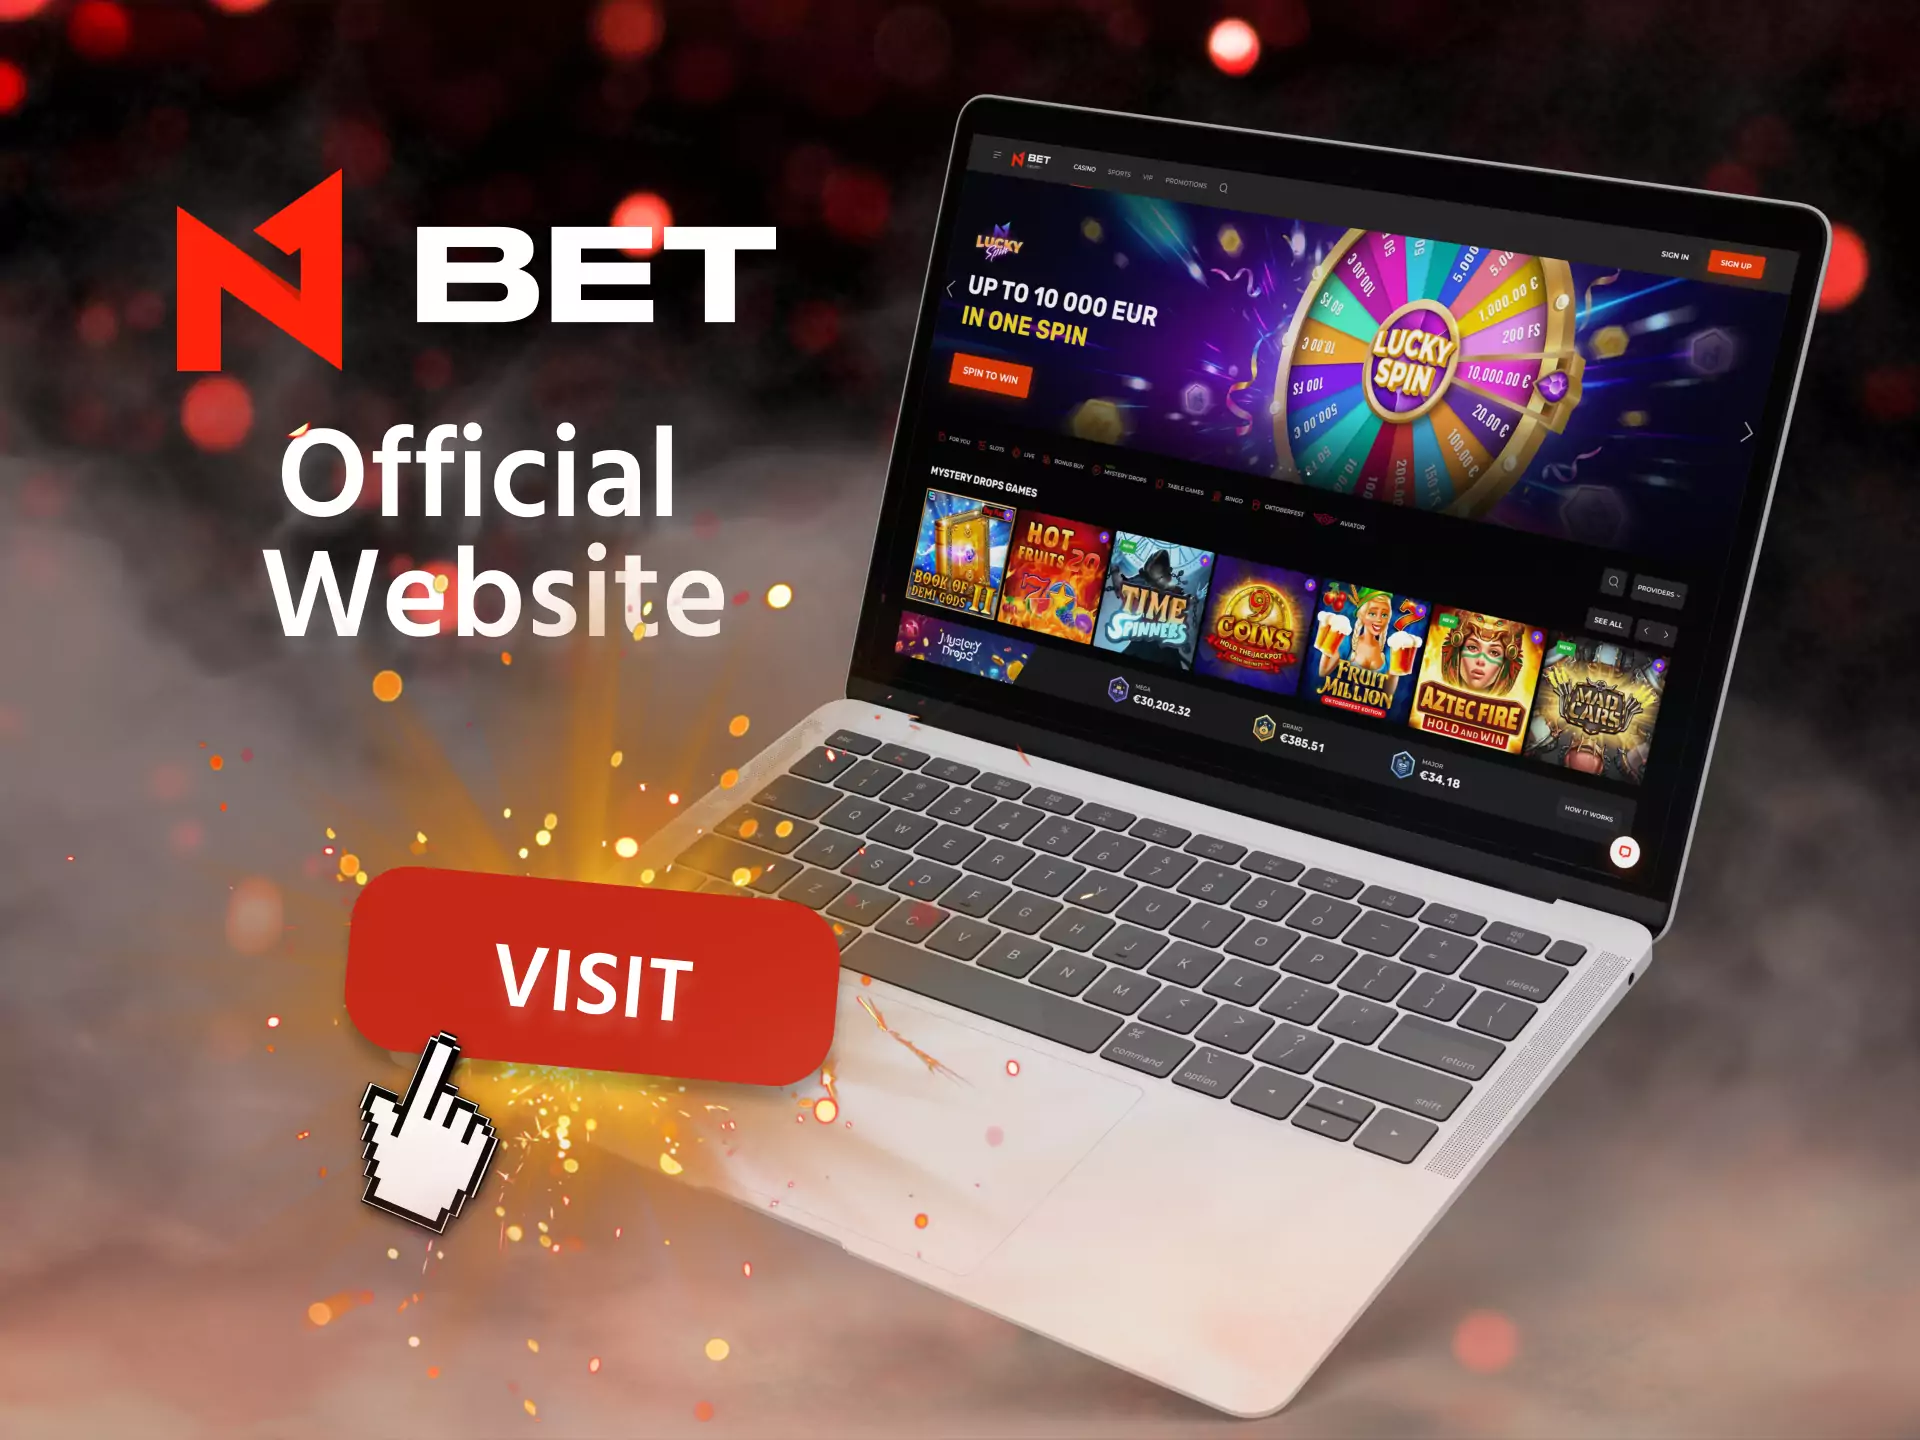 Visit the official website in N1Bet, it is convenient and easy to use.